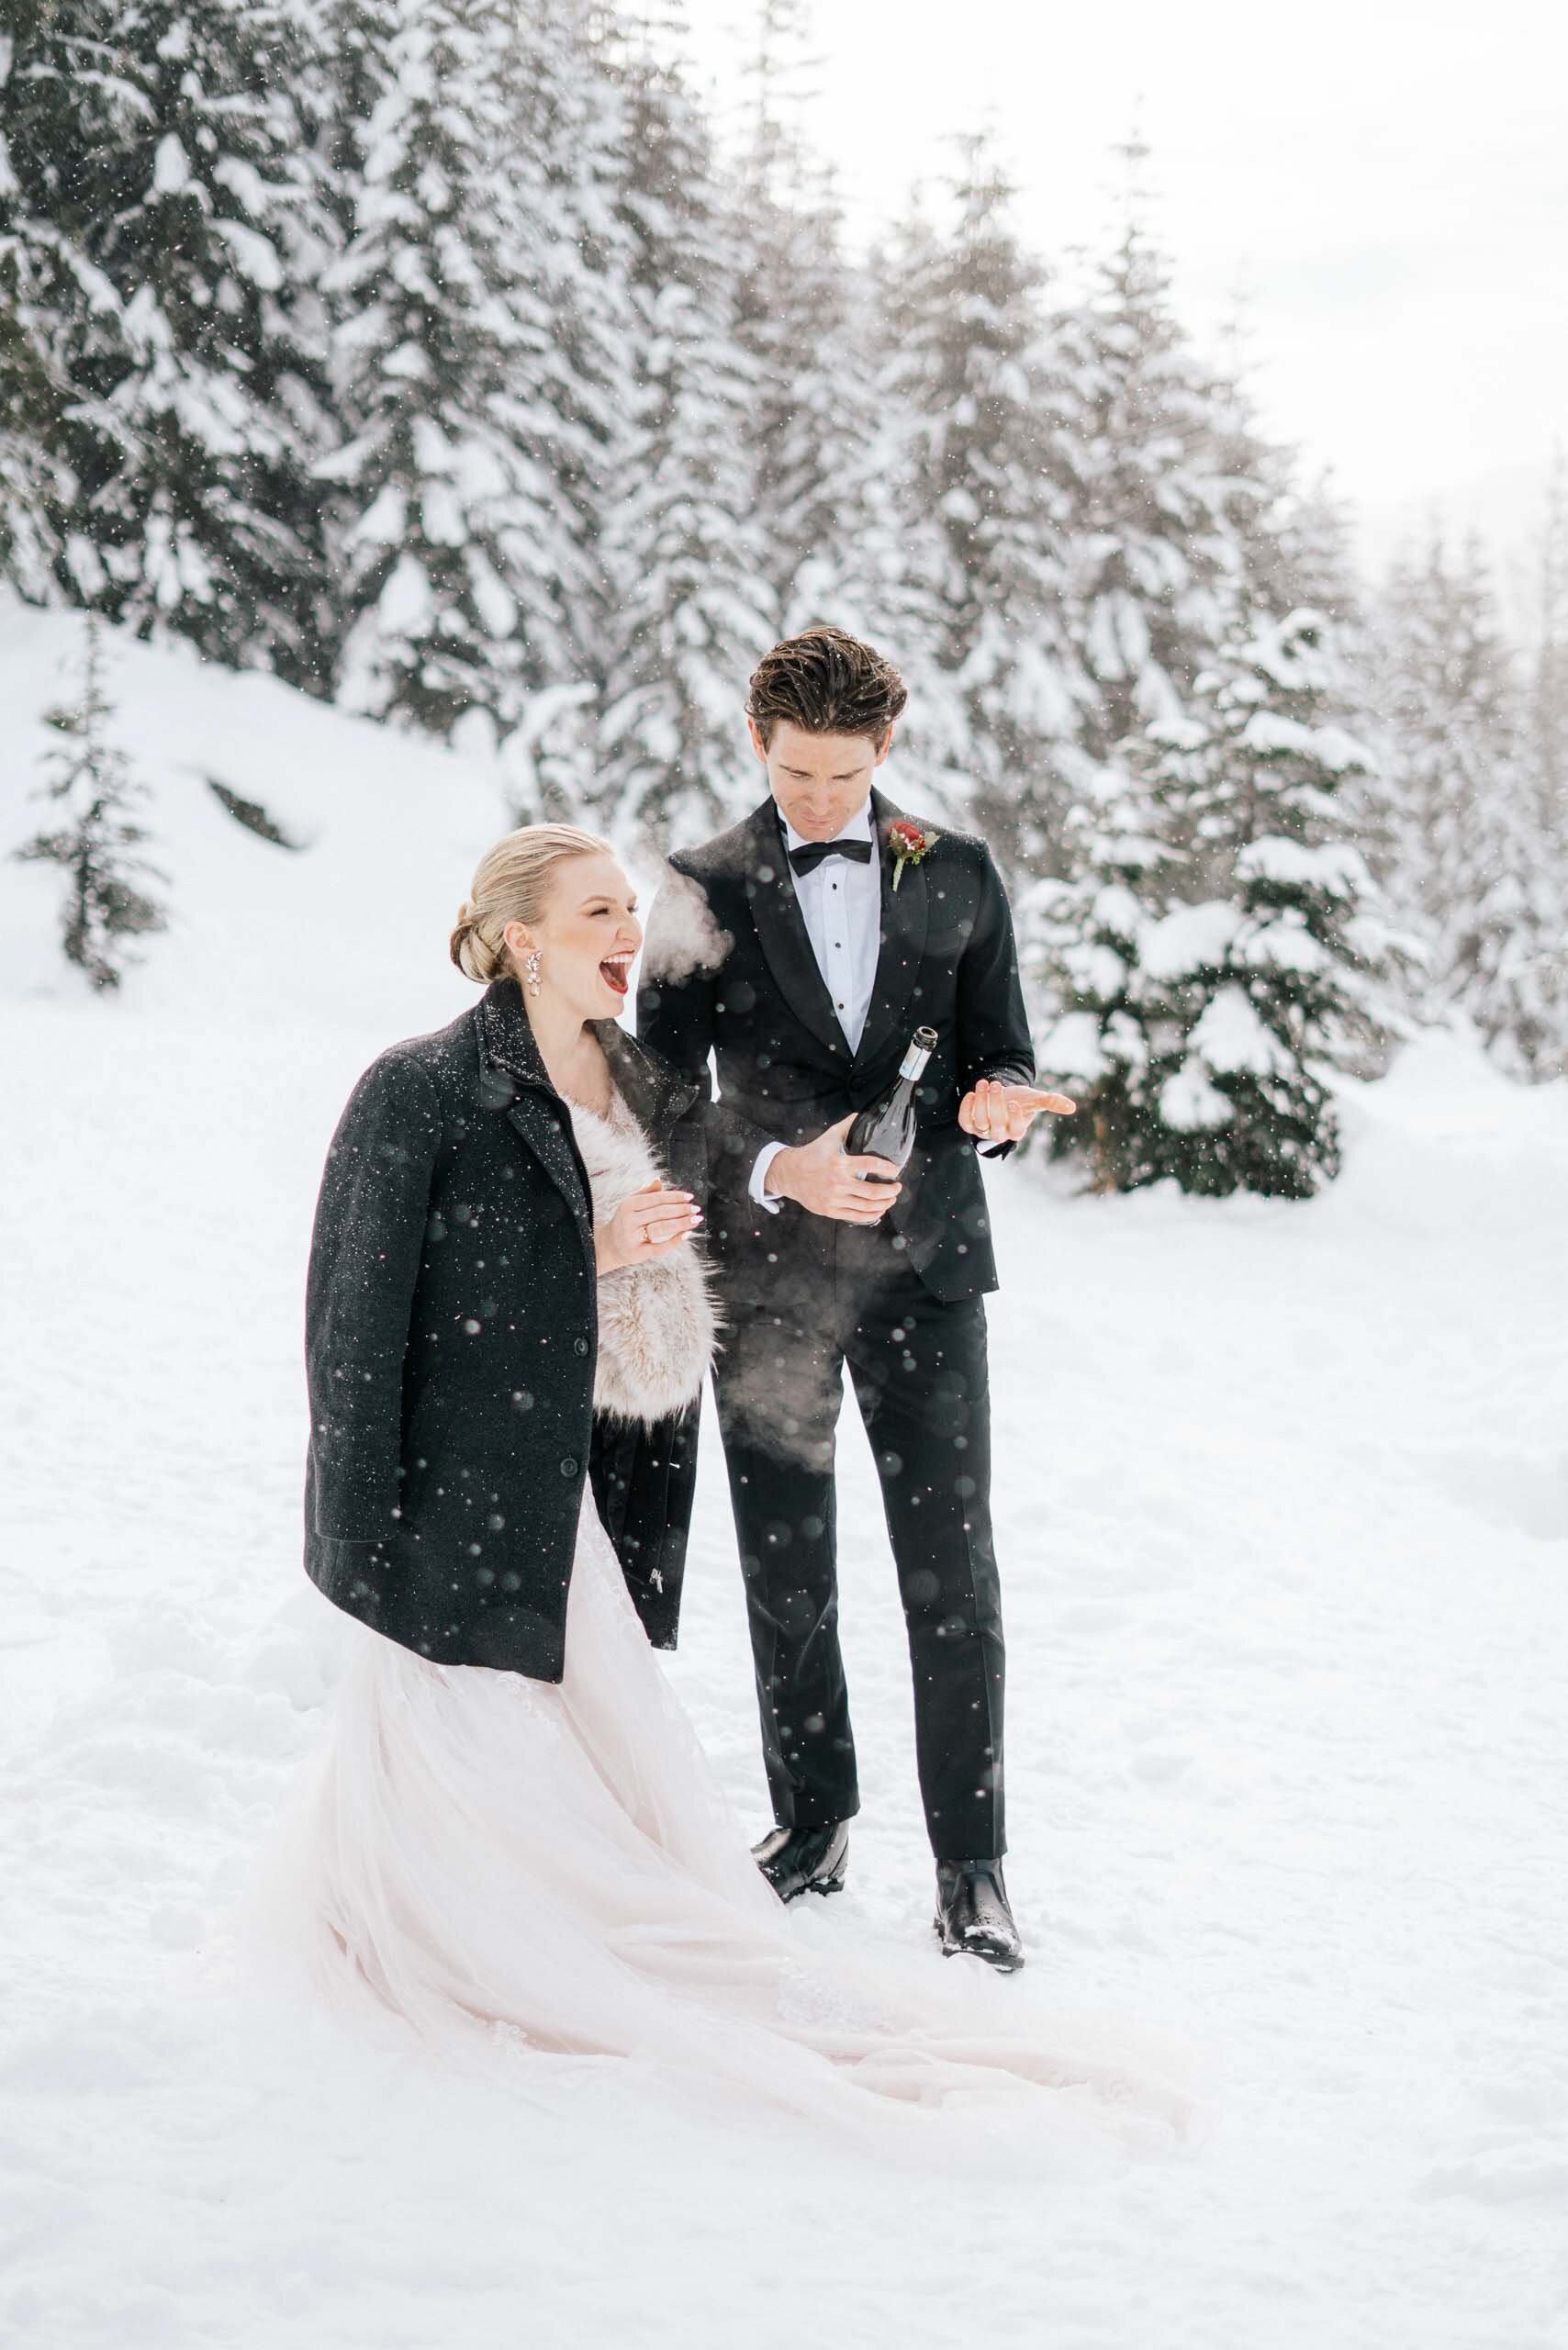 A chilly bride and groom pop champagne in the snow during their outdoor wedding. 